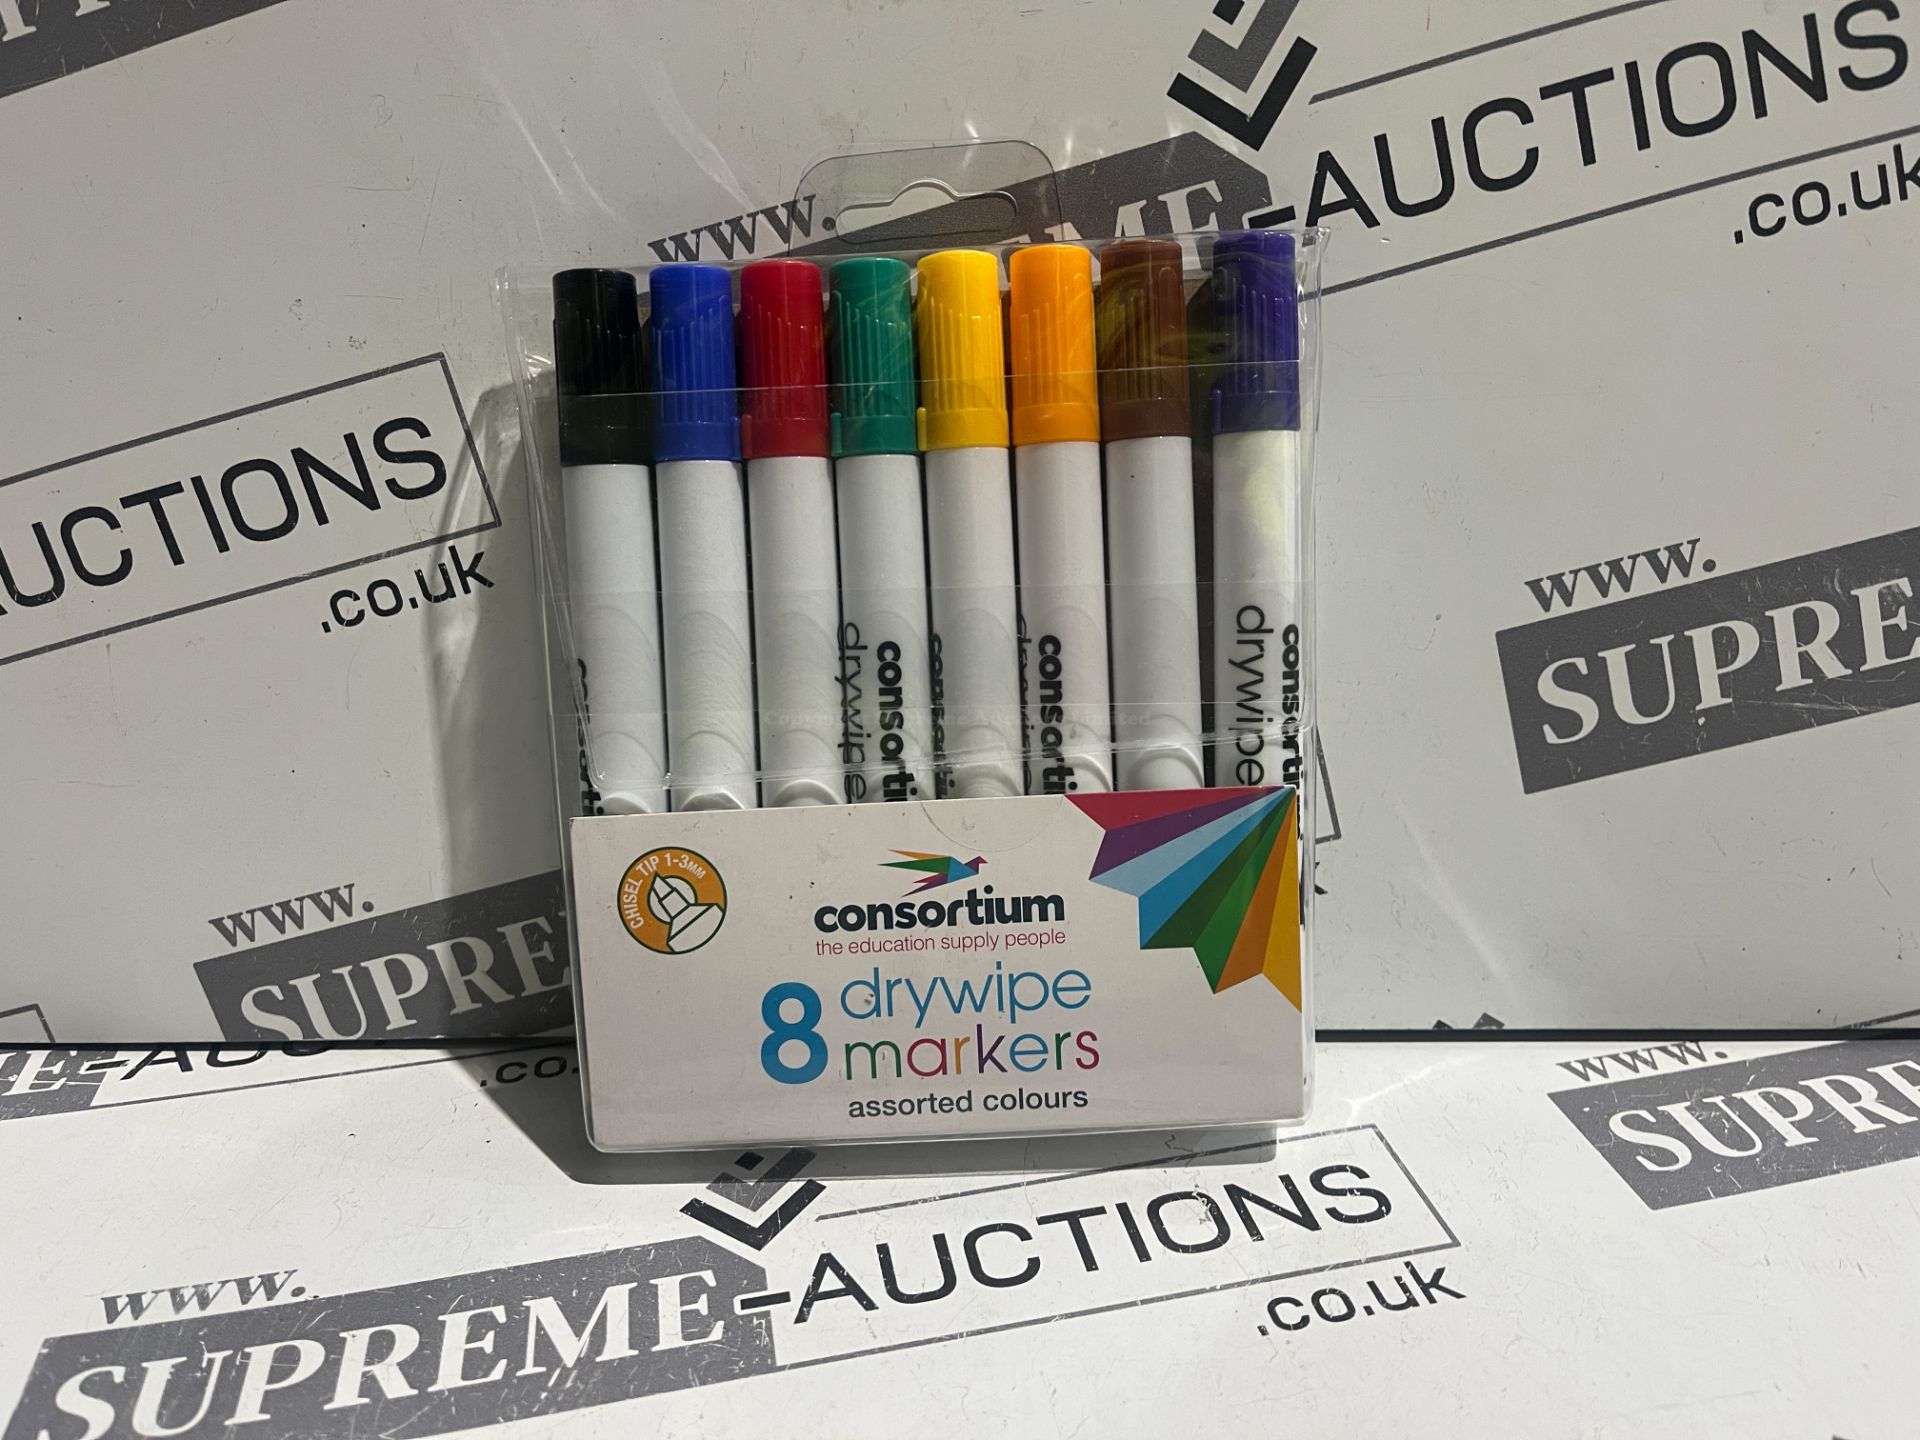 40 X BRAND NEW PACKS OF 8 ASSORTED DRYWIPE MARKER PENS R13-4